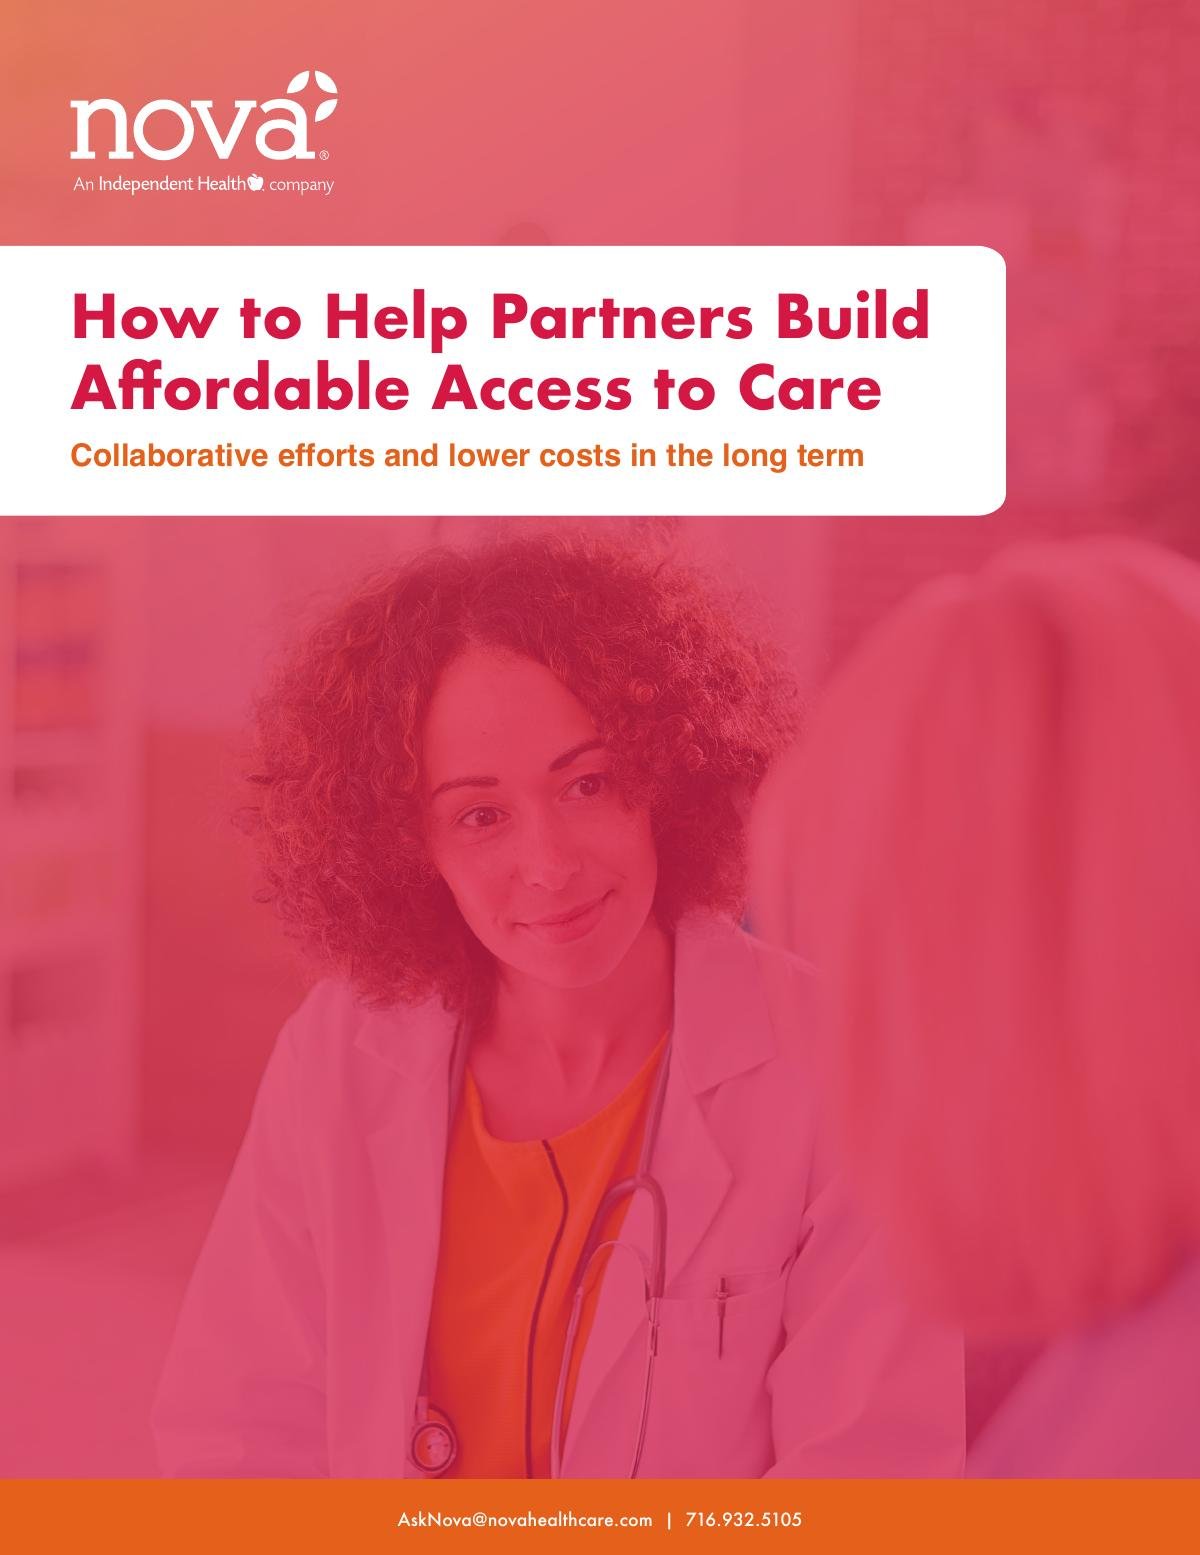 How to Help Partners Build Affordable Access to Care